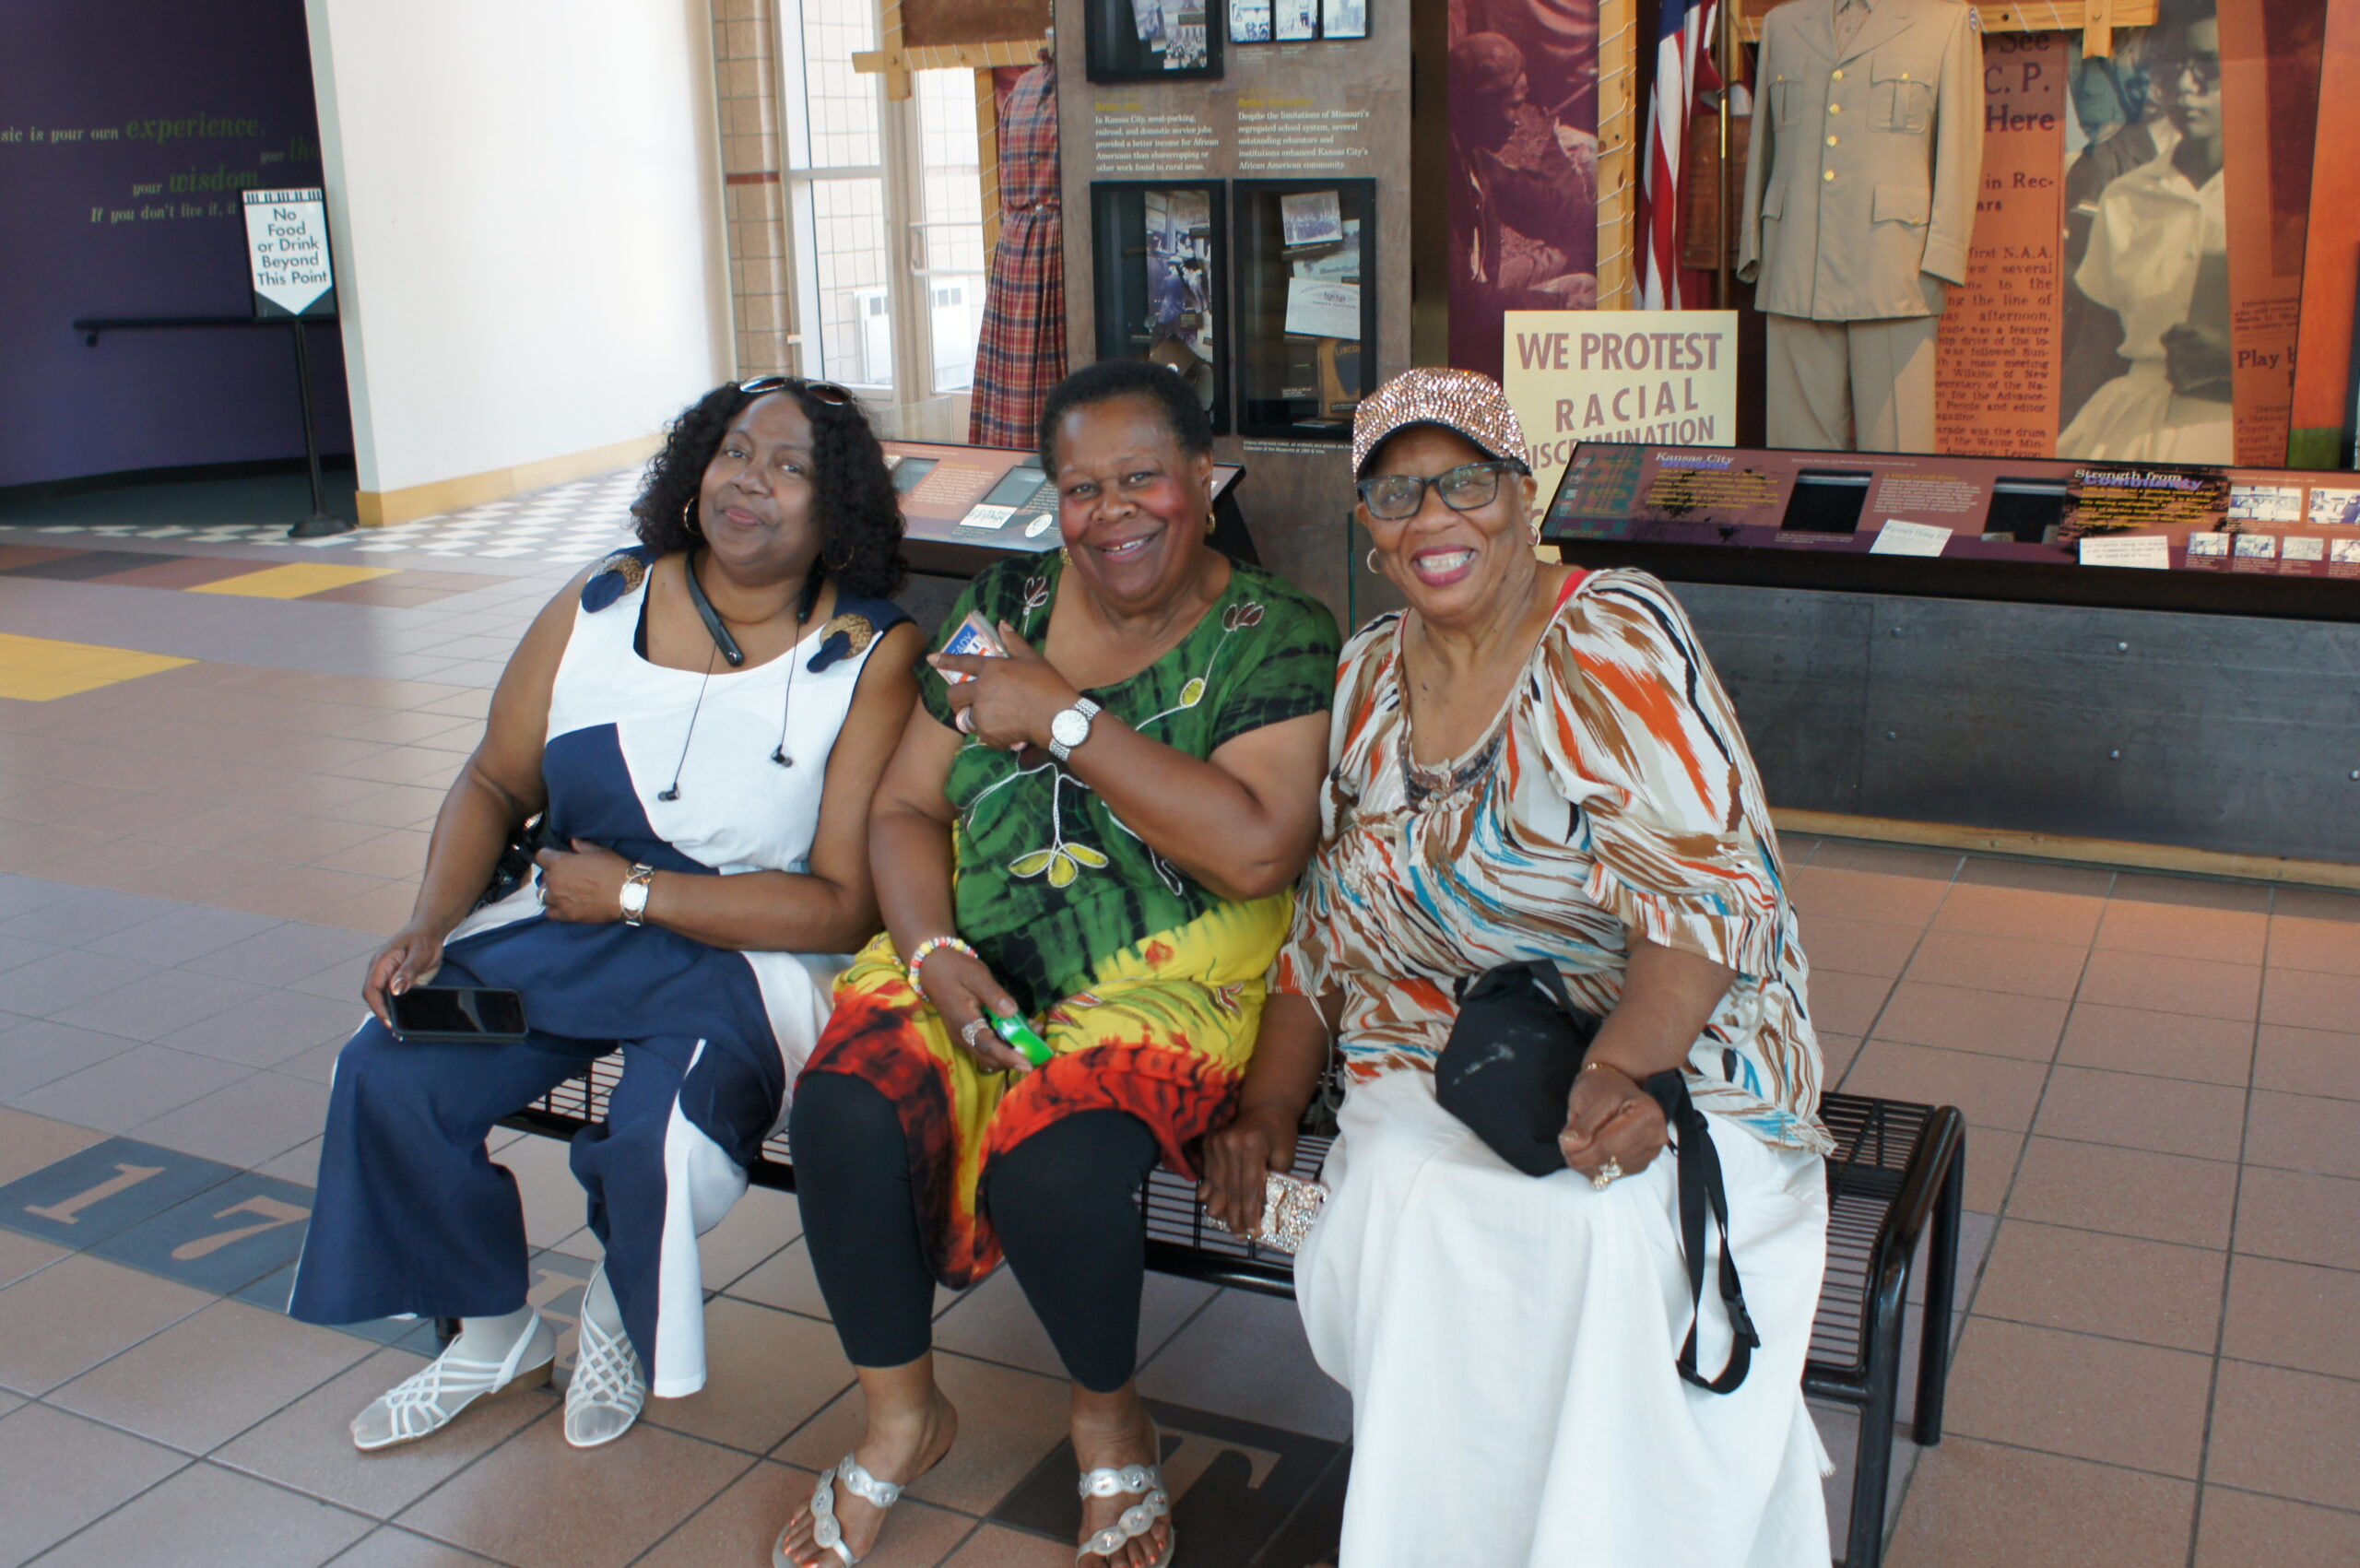 Juanita Lewis, Jessie Lee Brown and Doris Manning seated in lobby of Negro League Baseball and Jazz Museums in Kansas City, Missouri.